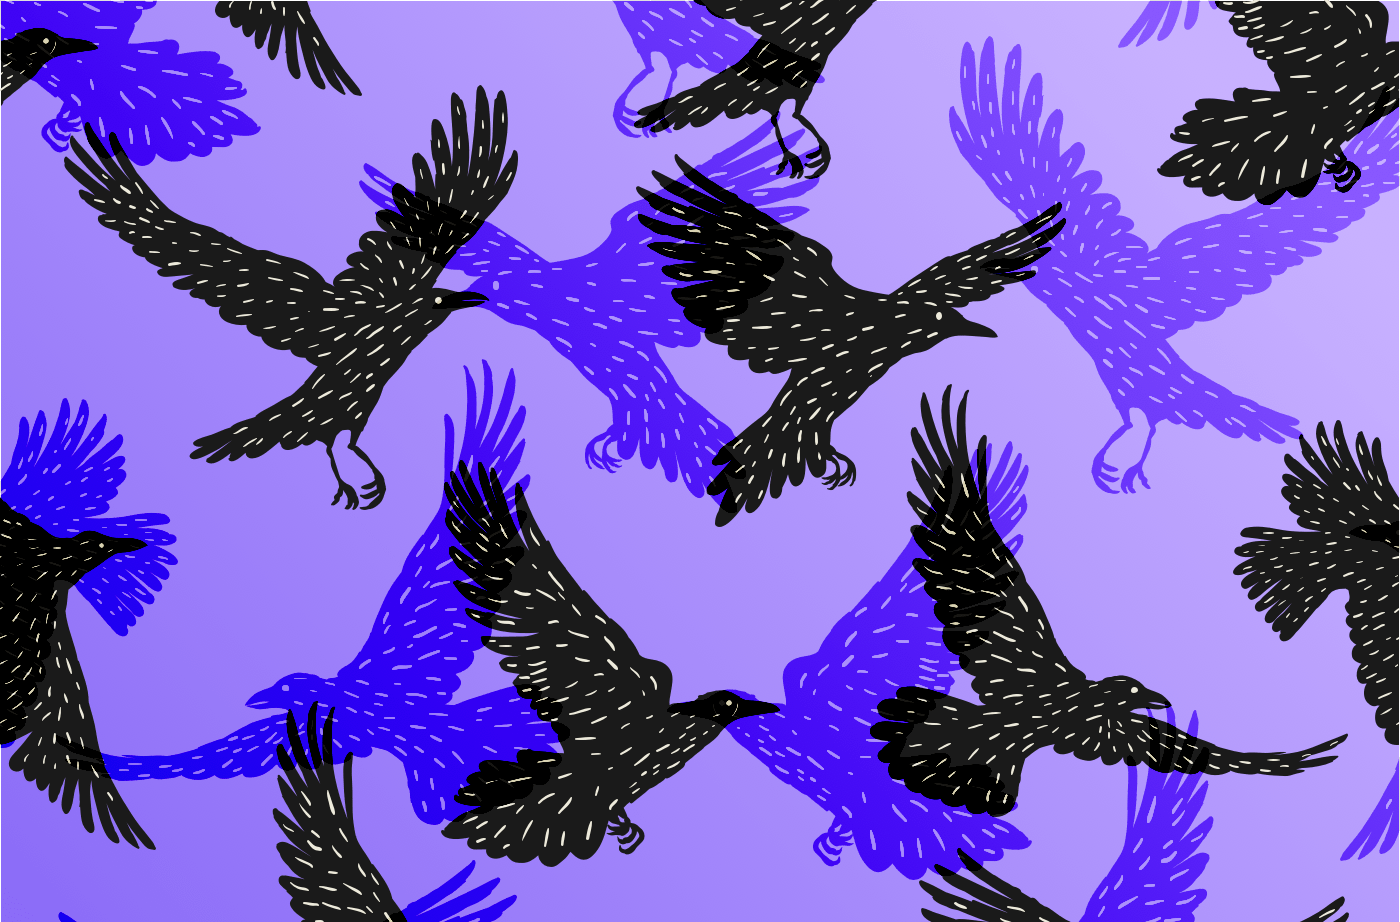 an illustration of dozens of crows flying and overlapping each other. half the crows are black, the other half are shades of purple